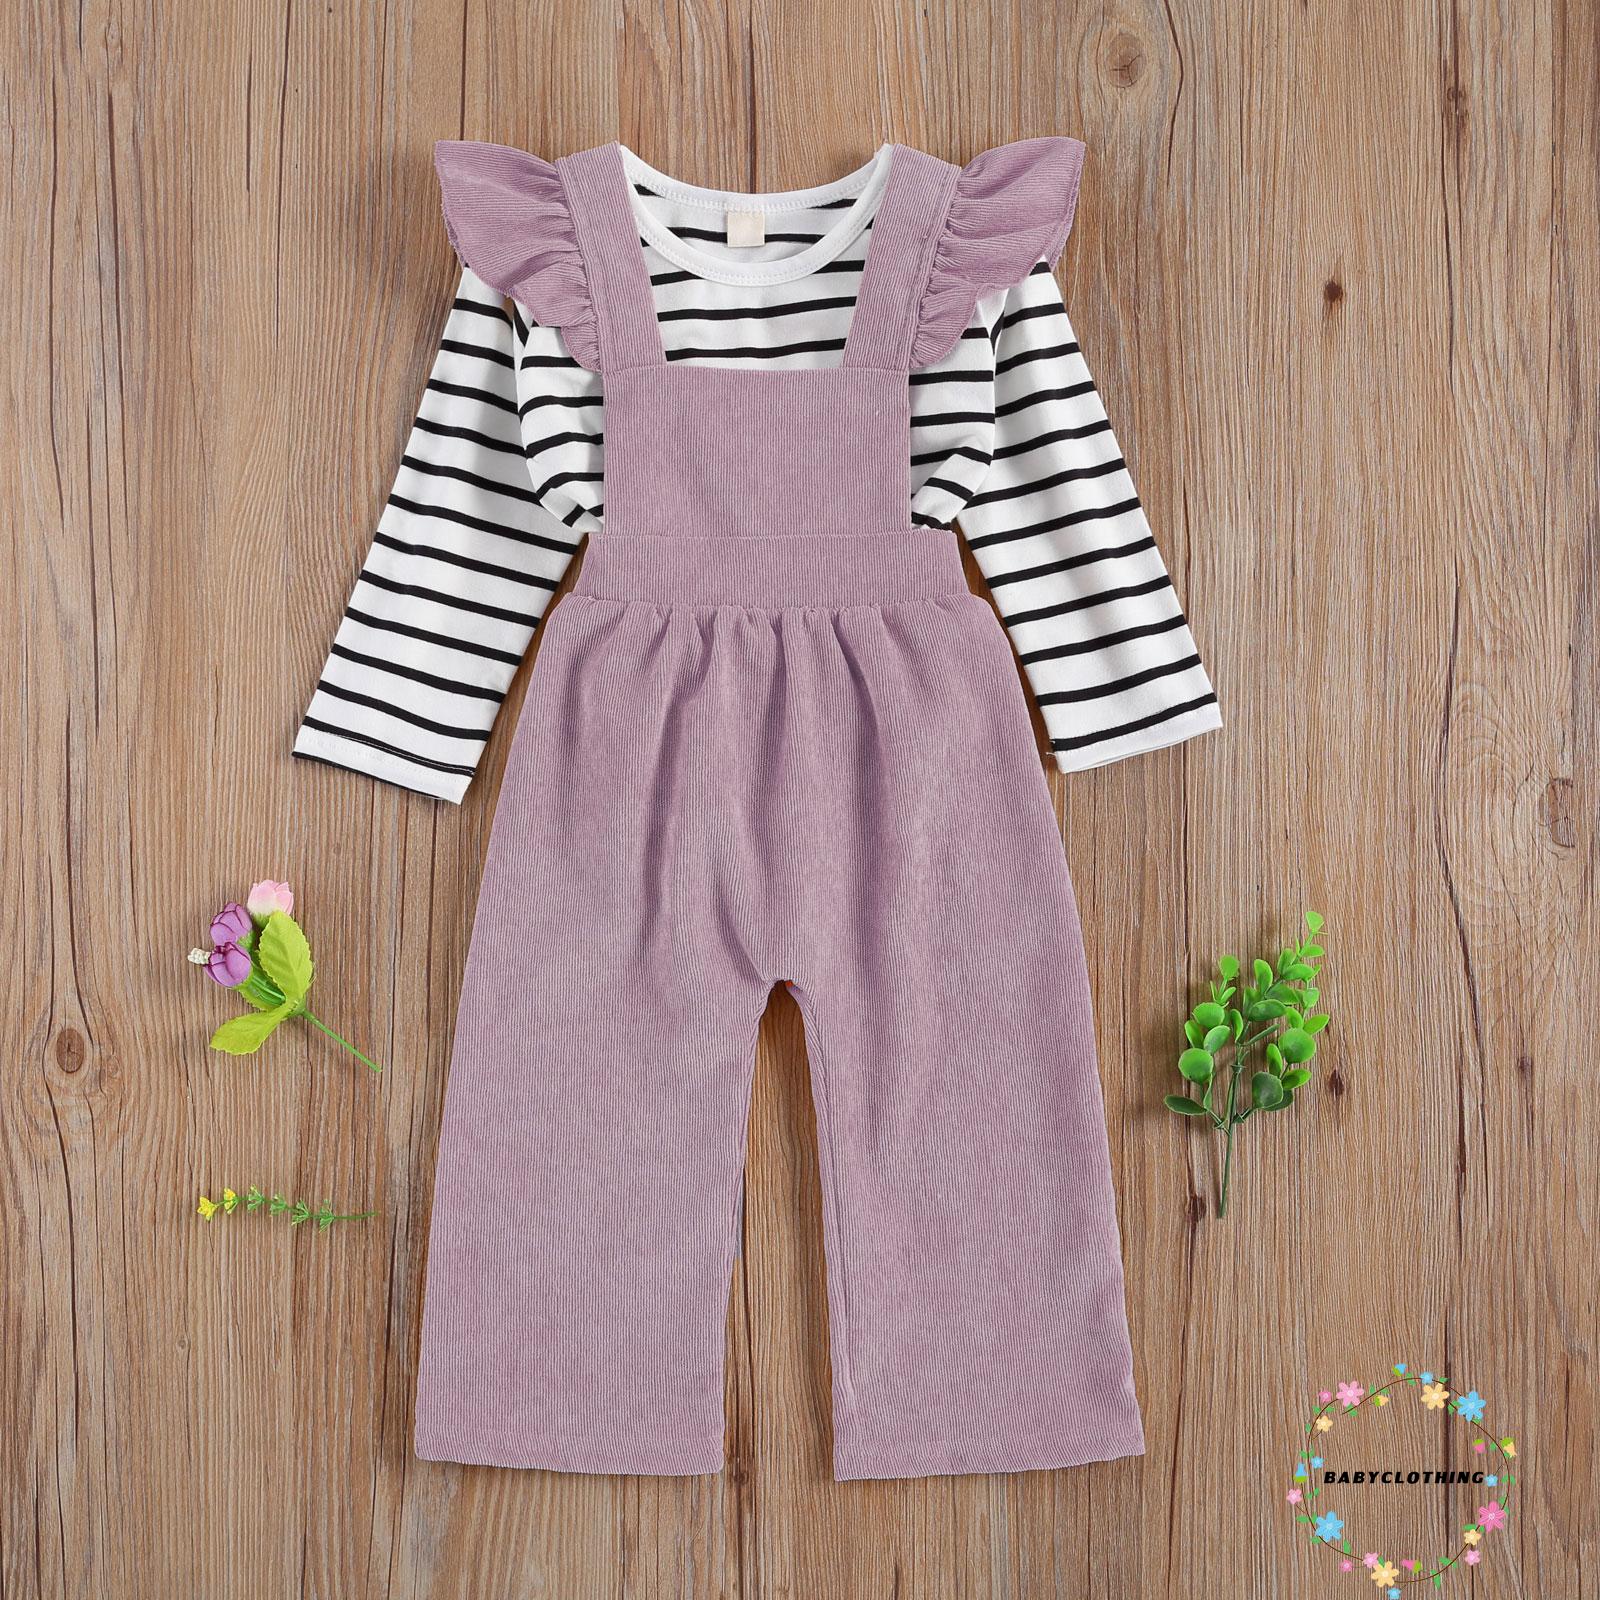 BBCQ-2-piece Little Girls Overall Set, Children Stripe Print Long Sleeve Top and Solid Color Suspenders Long Pants